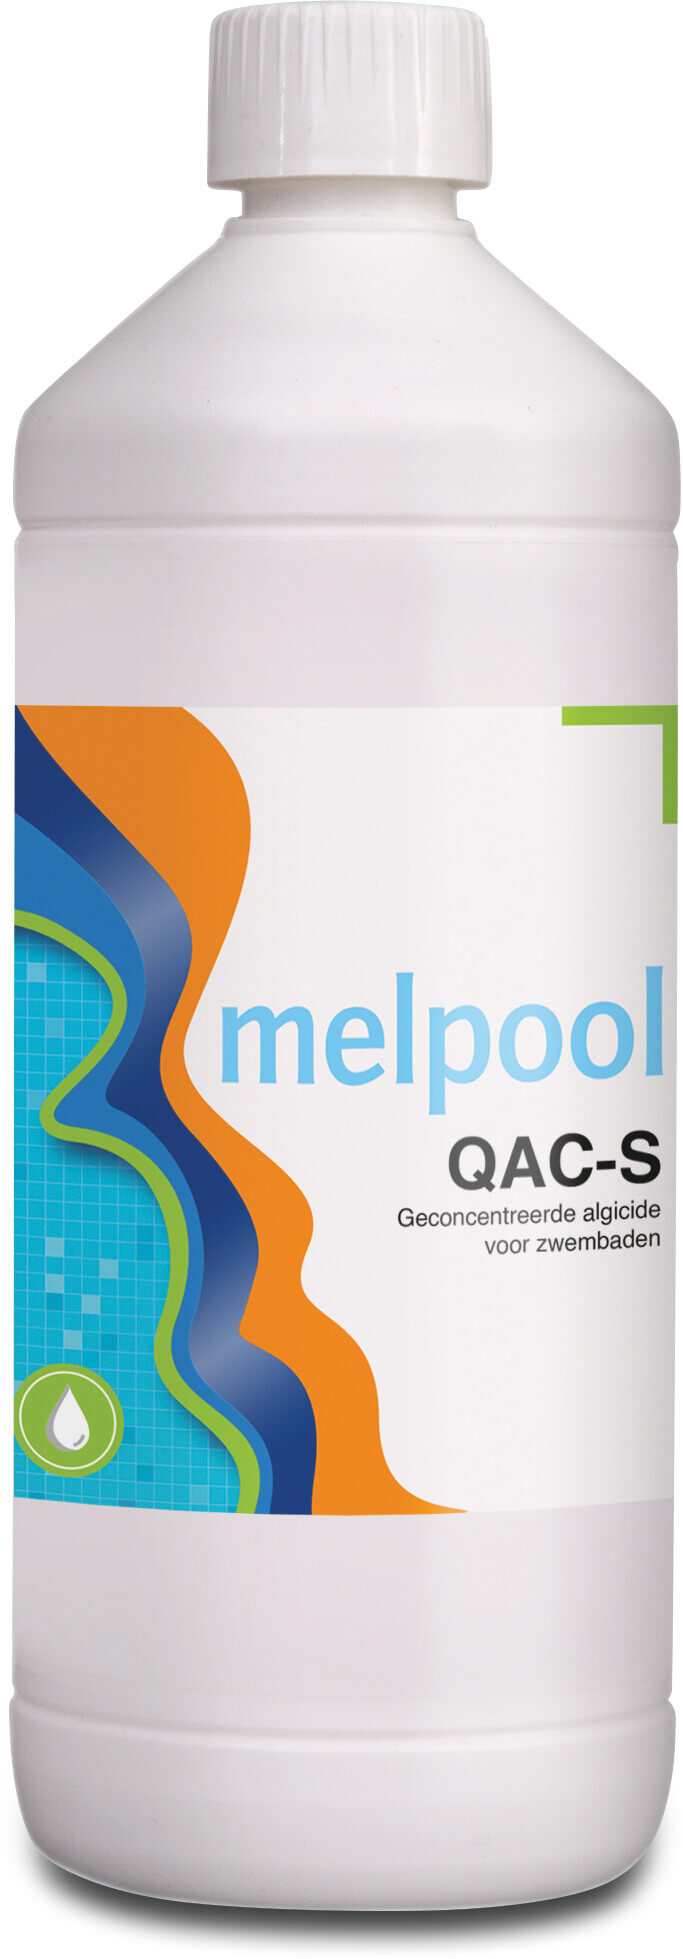 Melpool QAC-S liquid Algicide highly concentrated 1ltr